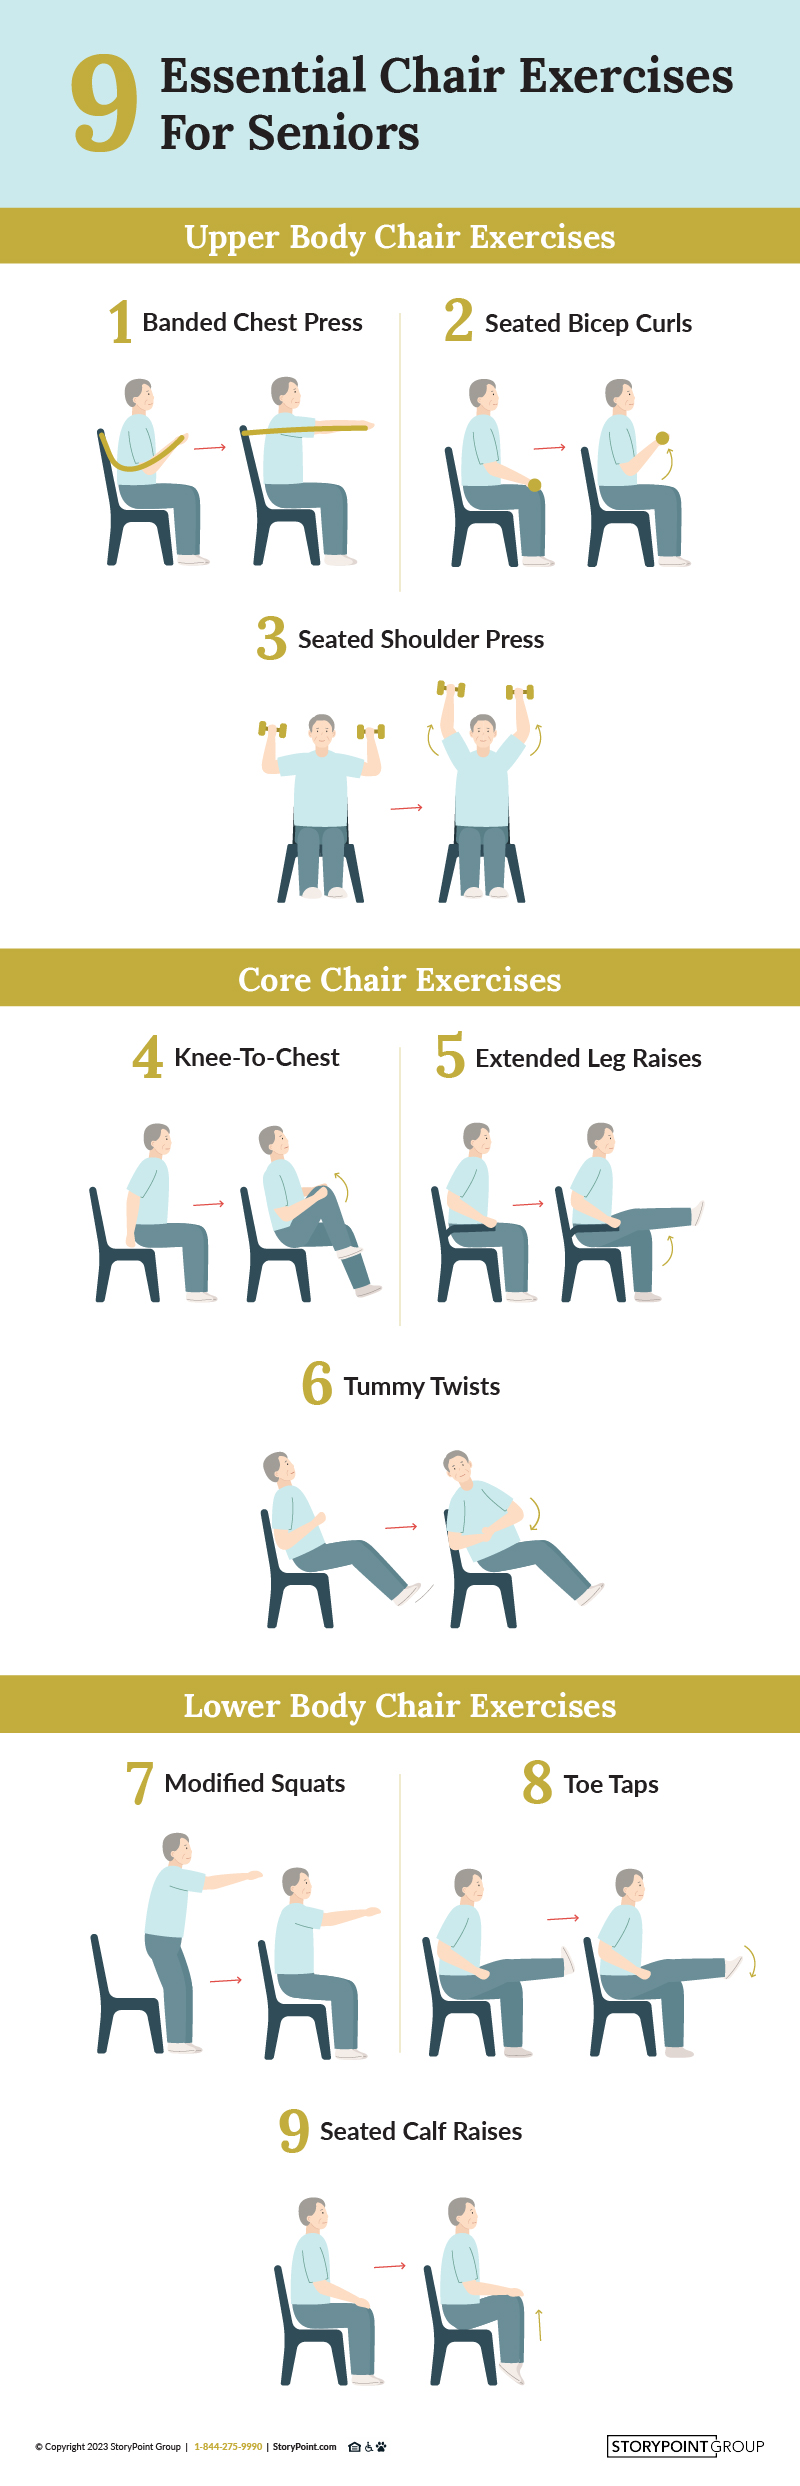 Seated And Chair Exercises For Seniors: Stay Fit in Your Golden Years